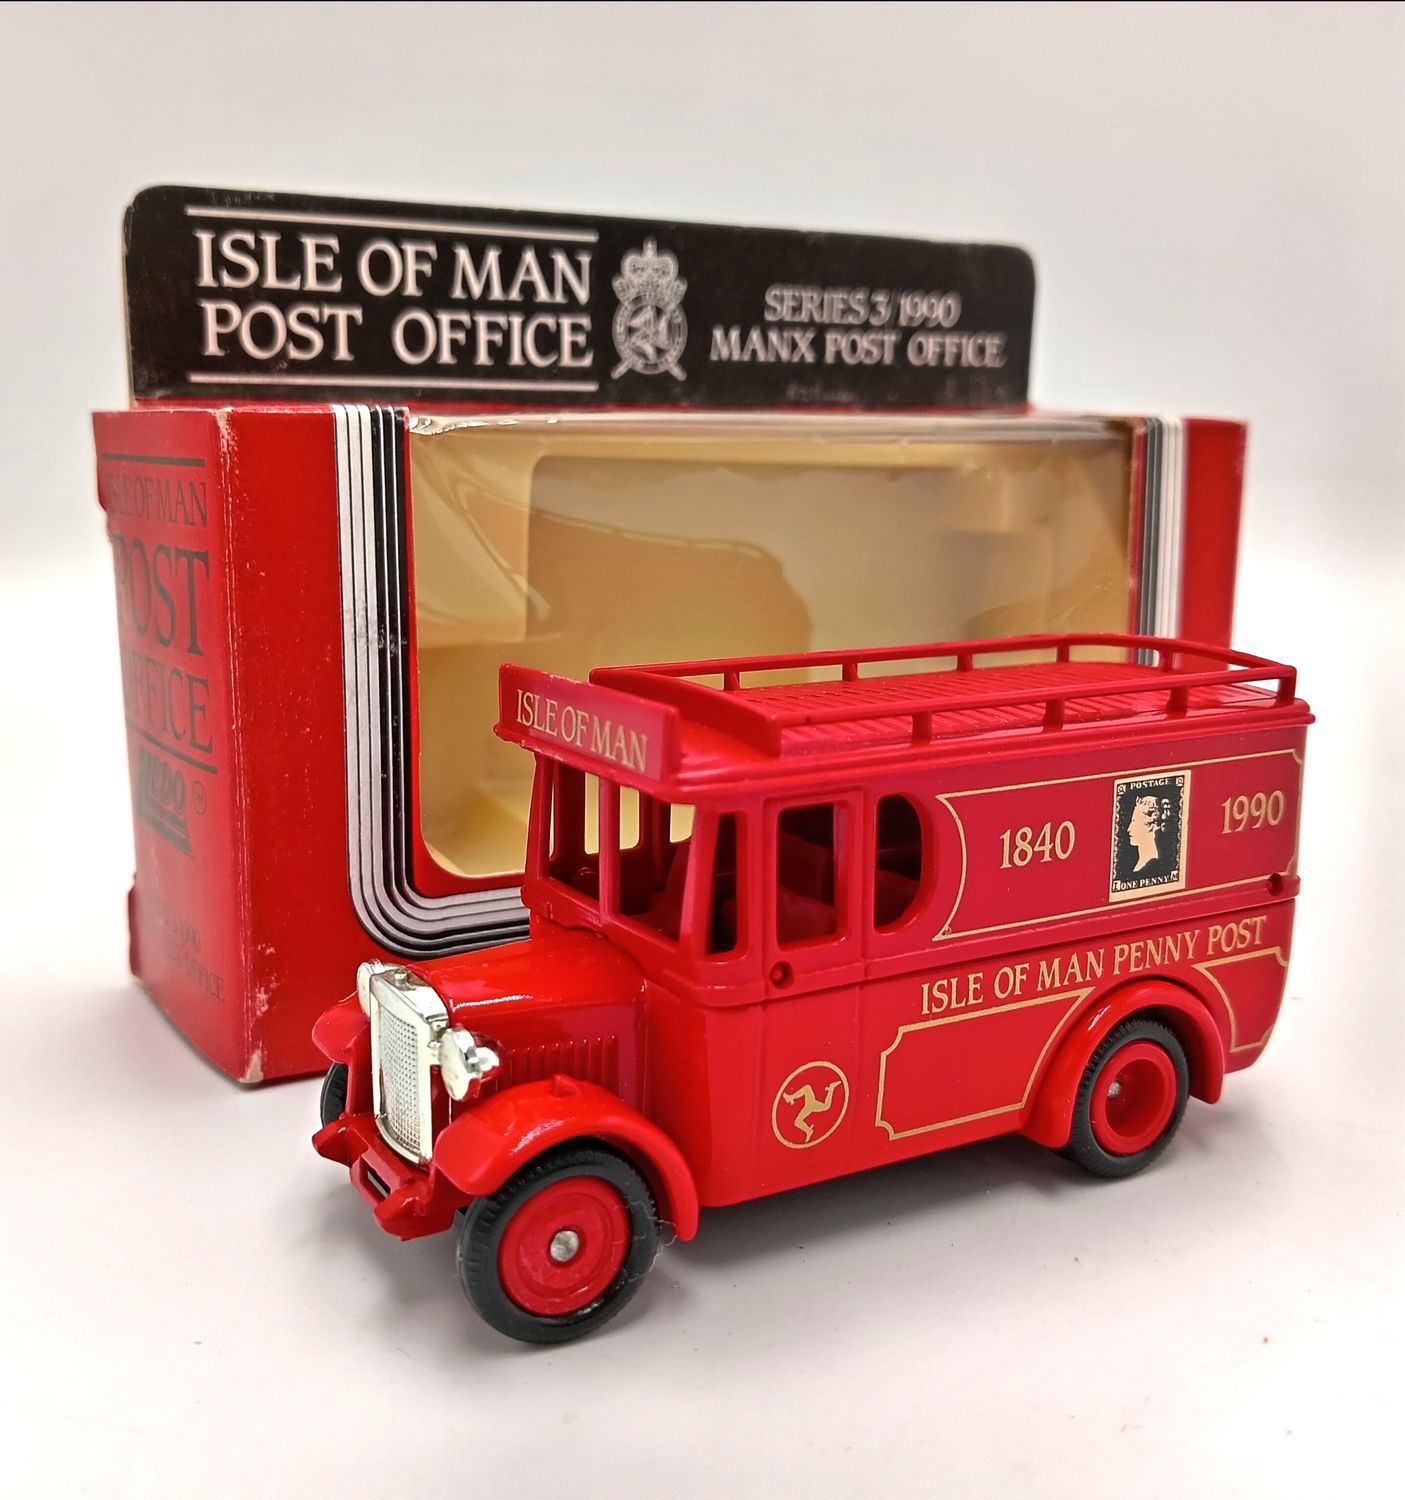 Lledo die-cast advertisement model car for &quot; Isle of Man Penny Post&quot; in box